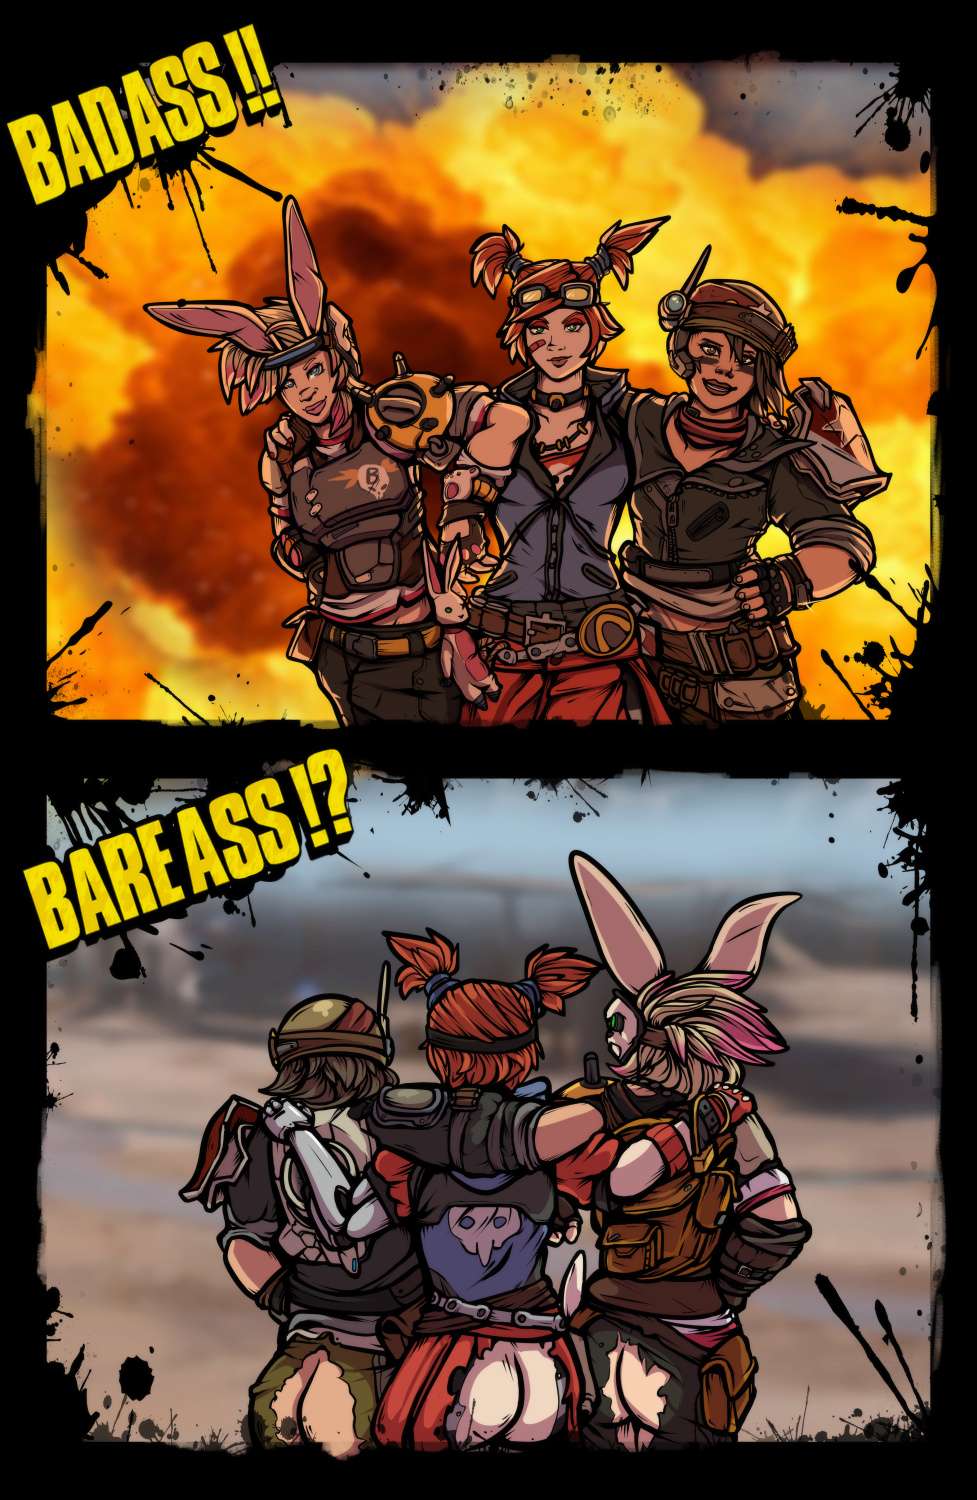 3_girls 3_girls ass blonde_hair borderlands borderlands_3 butt_expansion embarrassed embarrassing exposed exposed_ass goggles goggles_on_head helmet red_hair ripped_clothes ripped_clothing tiny_tina wardrobe_malfunction